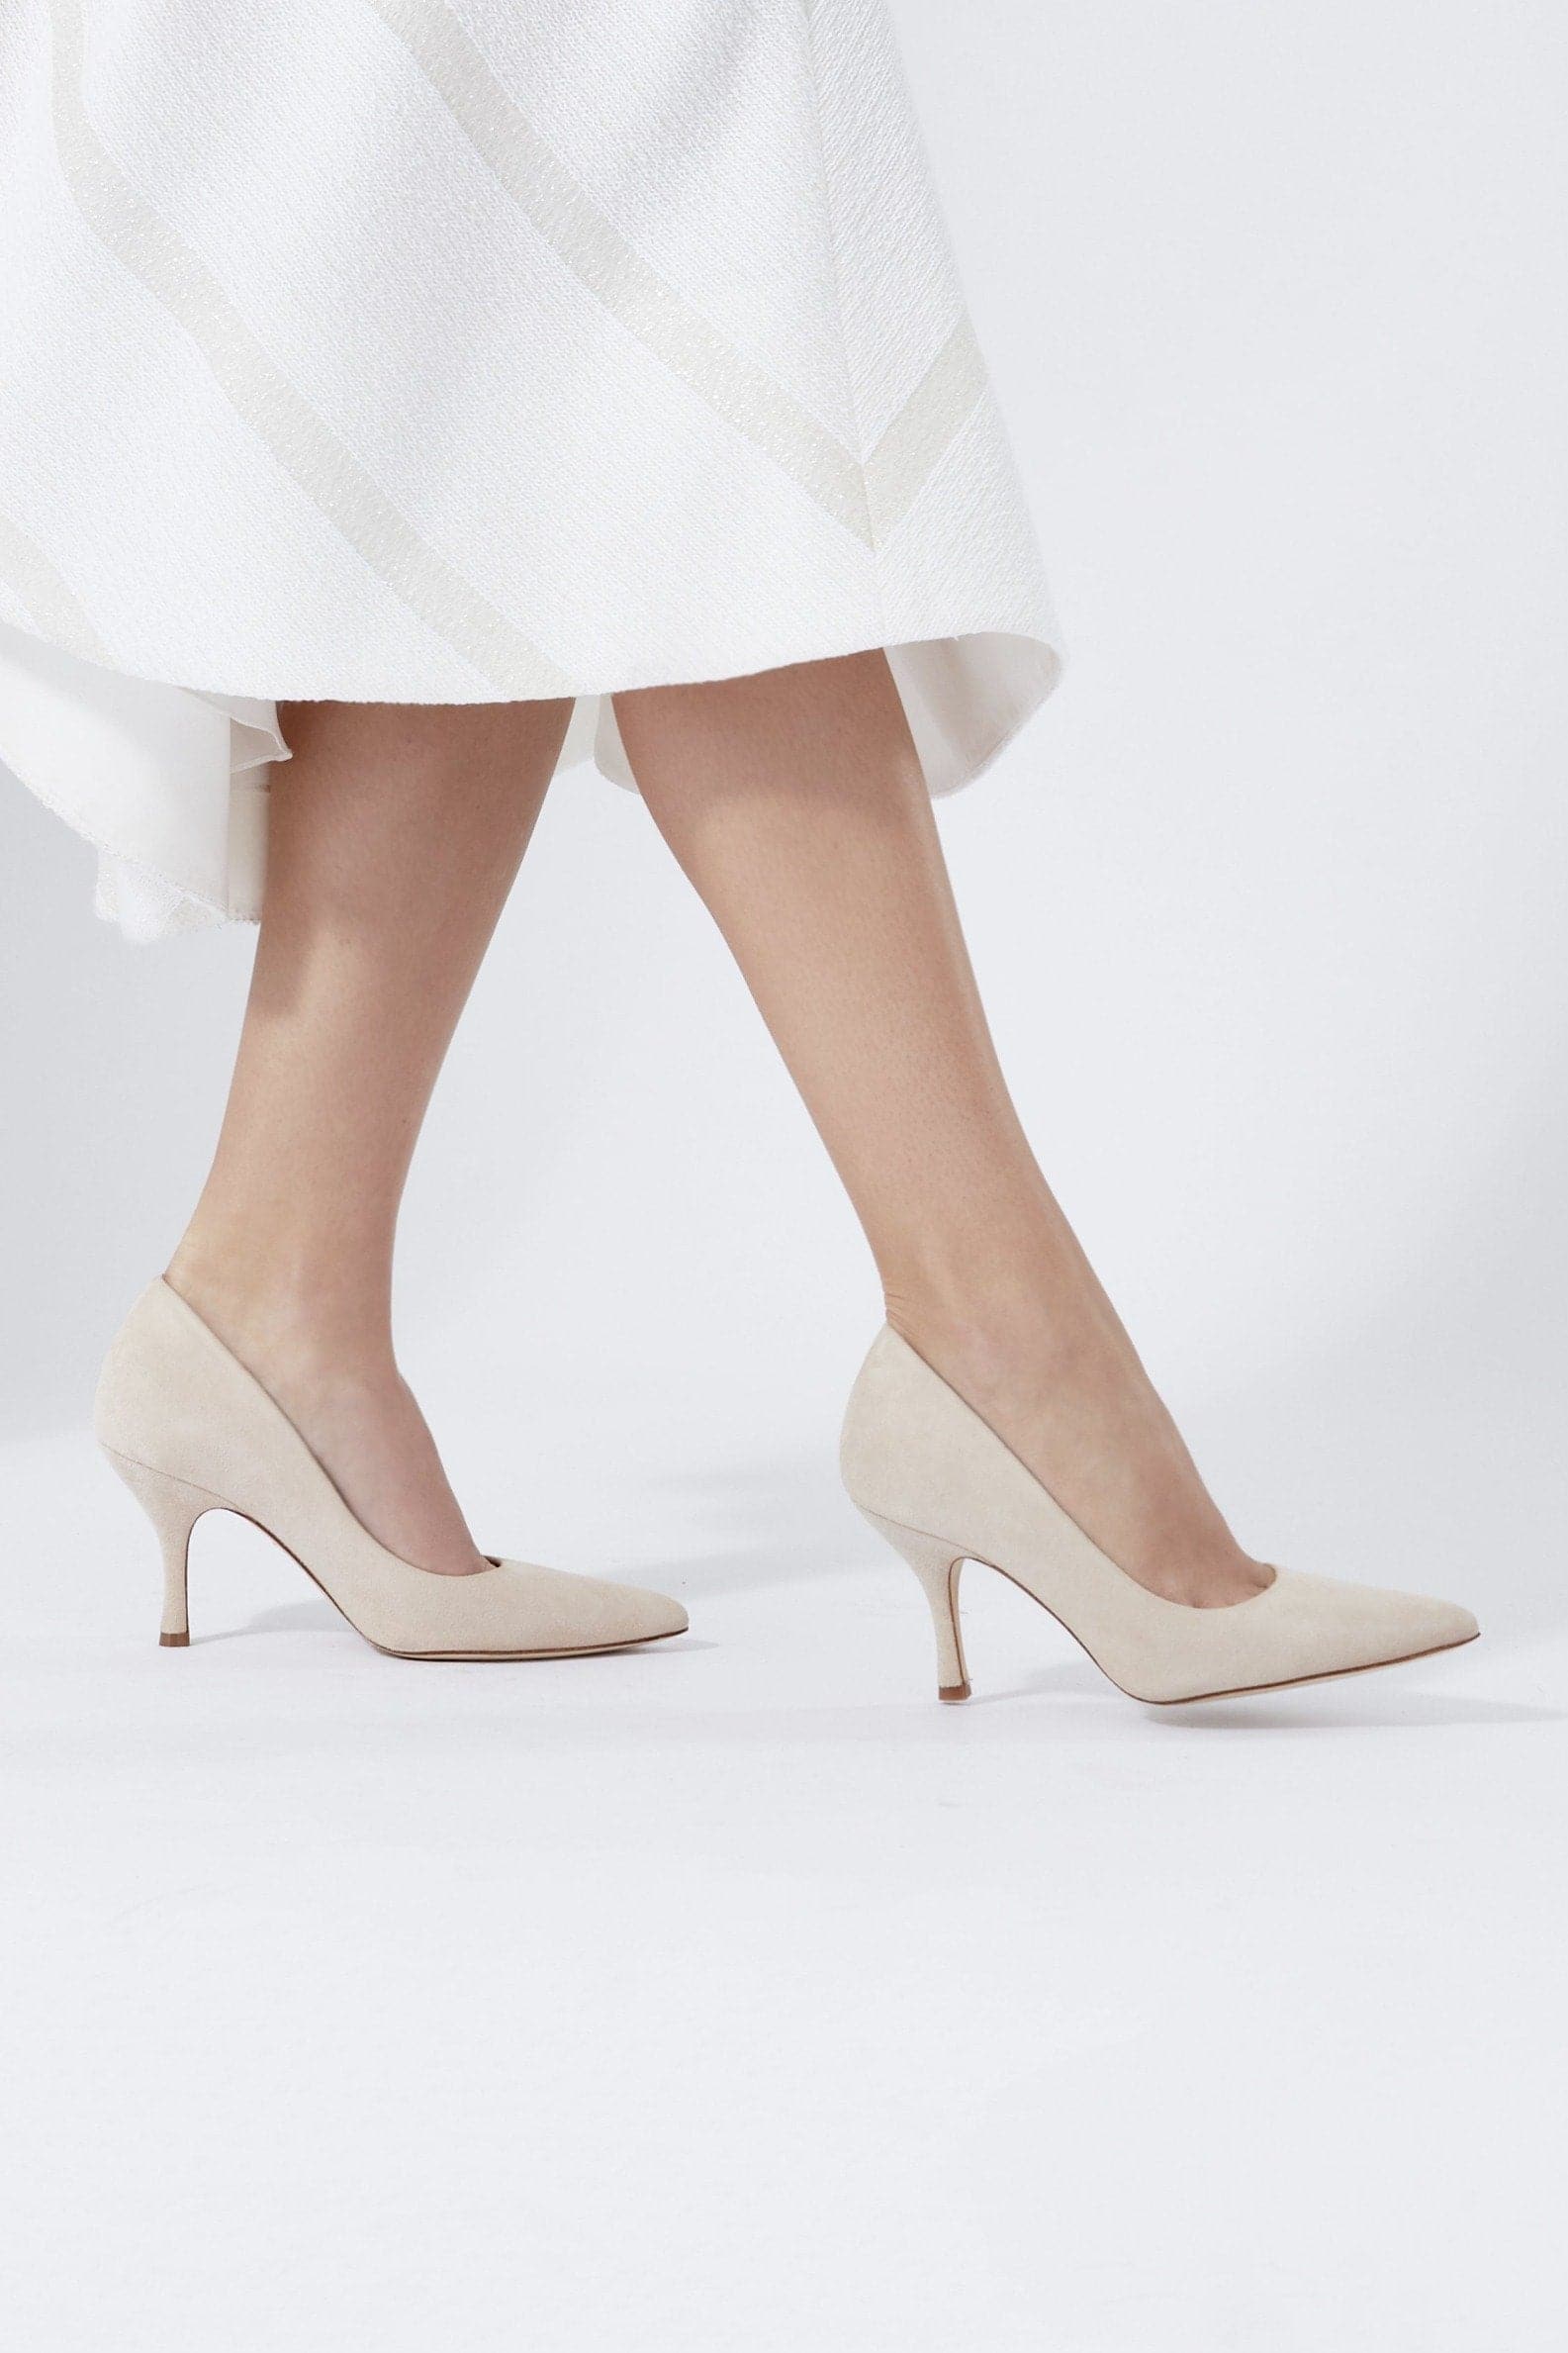 Olivia Blush Fashion Shoe Nude Pointed Suede Court Shoes image